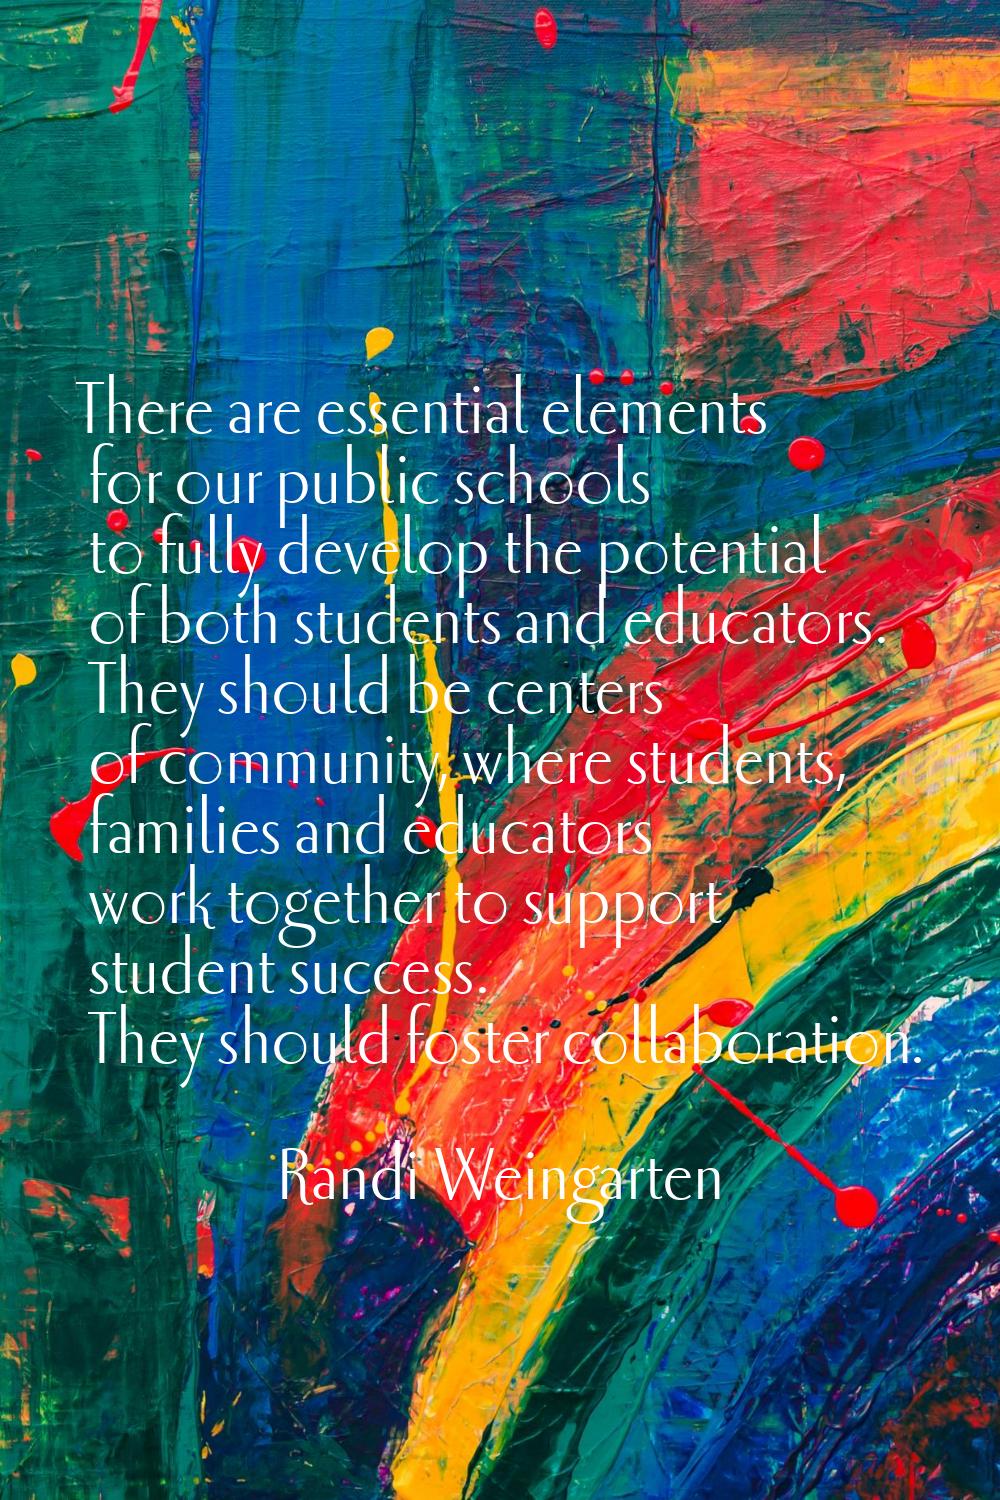 There are essential elements for our public schools to fully develop the potential of both students